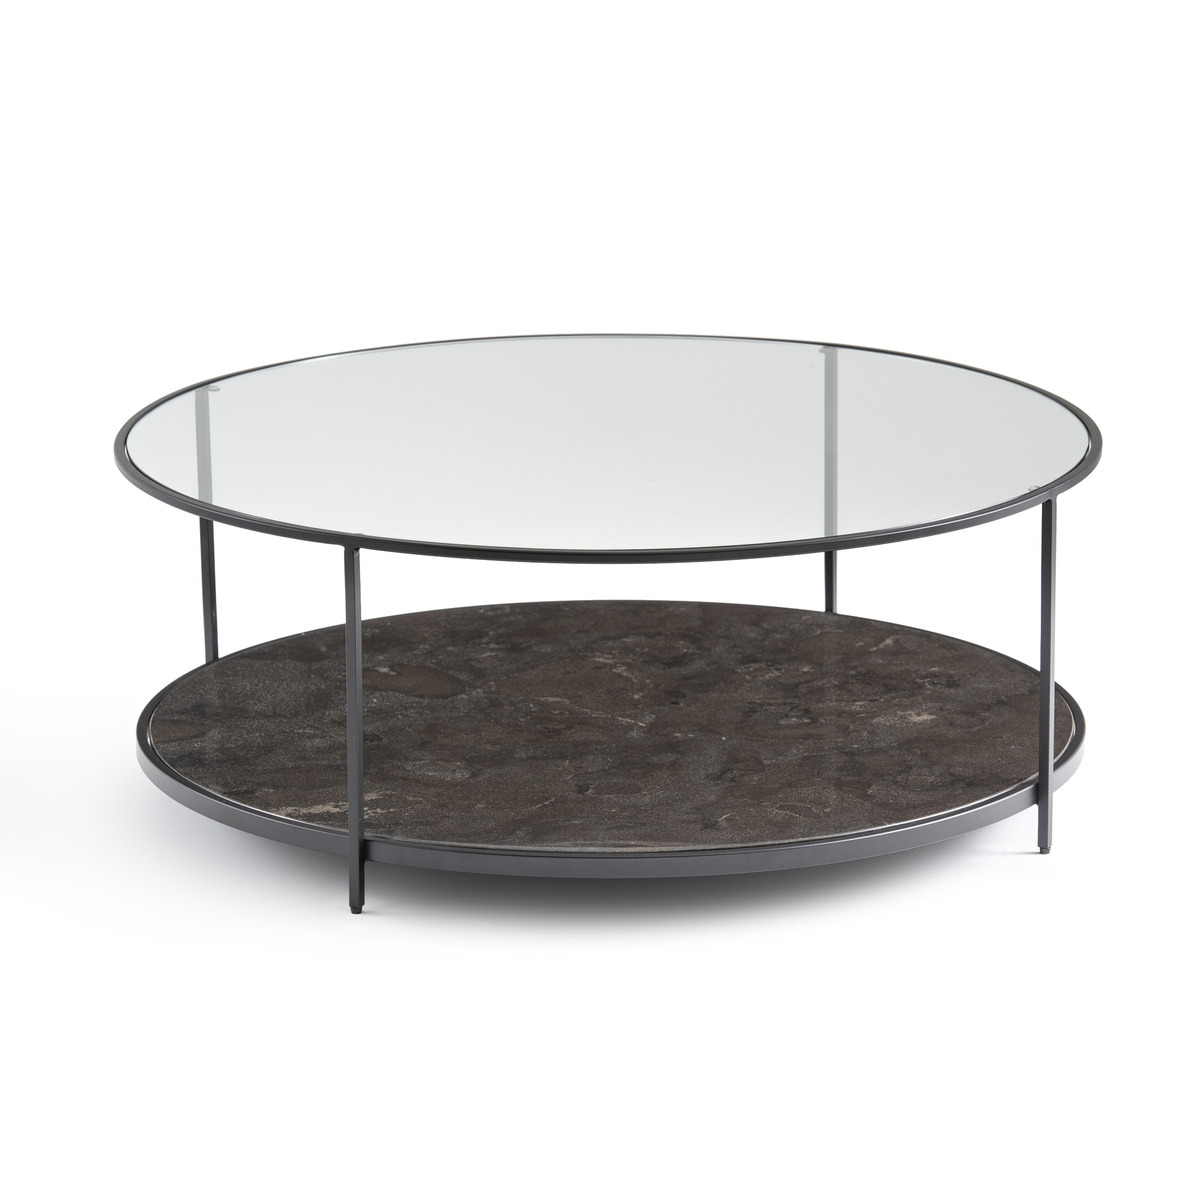 Buren Round Tempered Glass & Stone Coffee Table - image 1